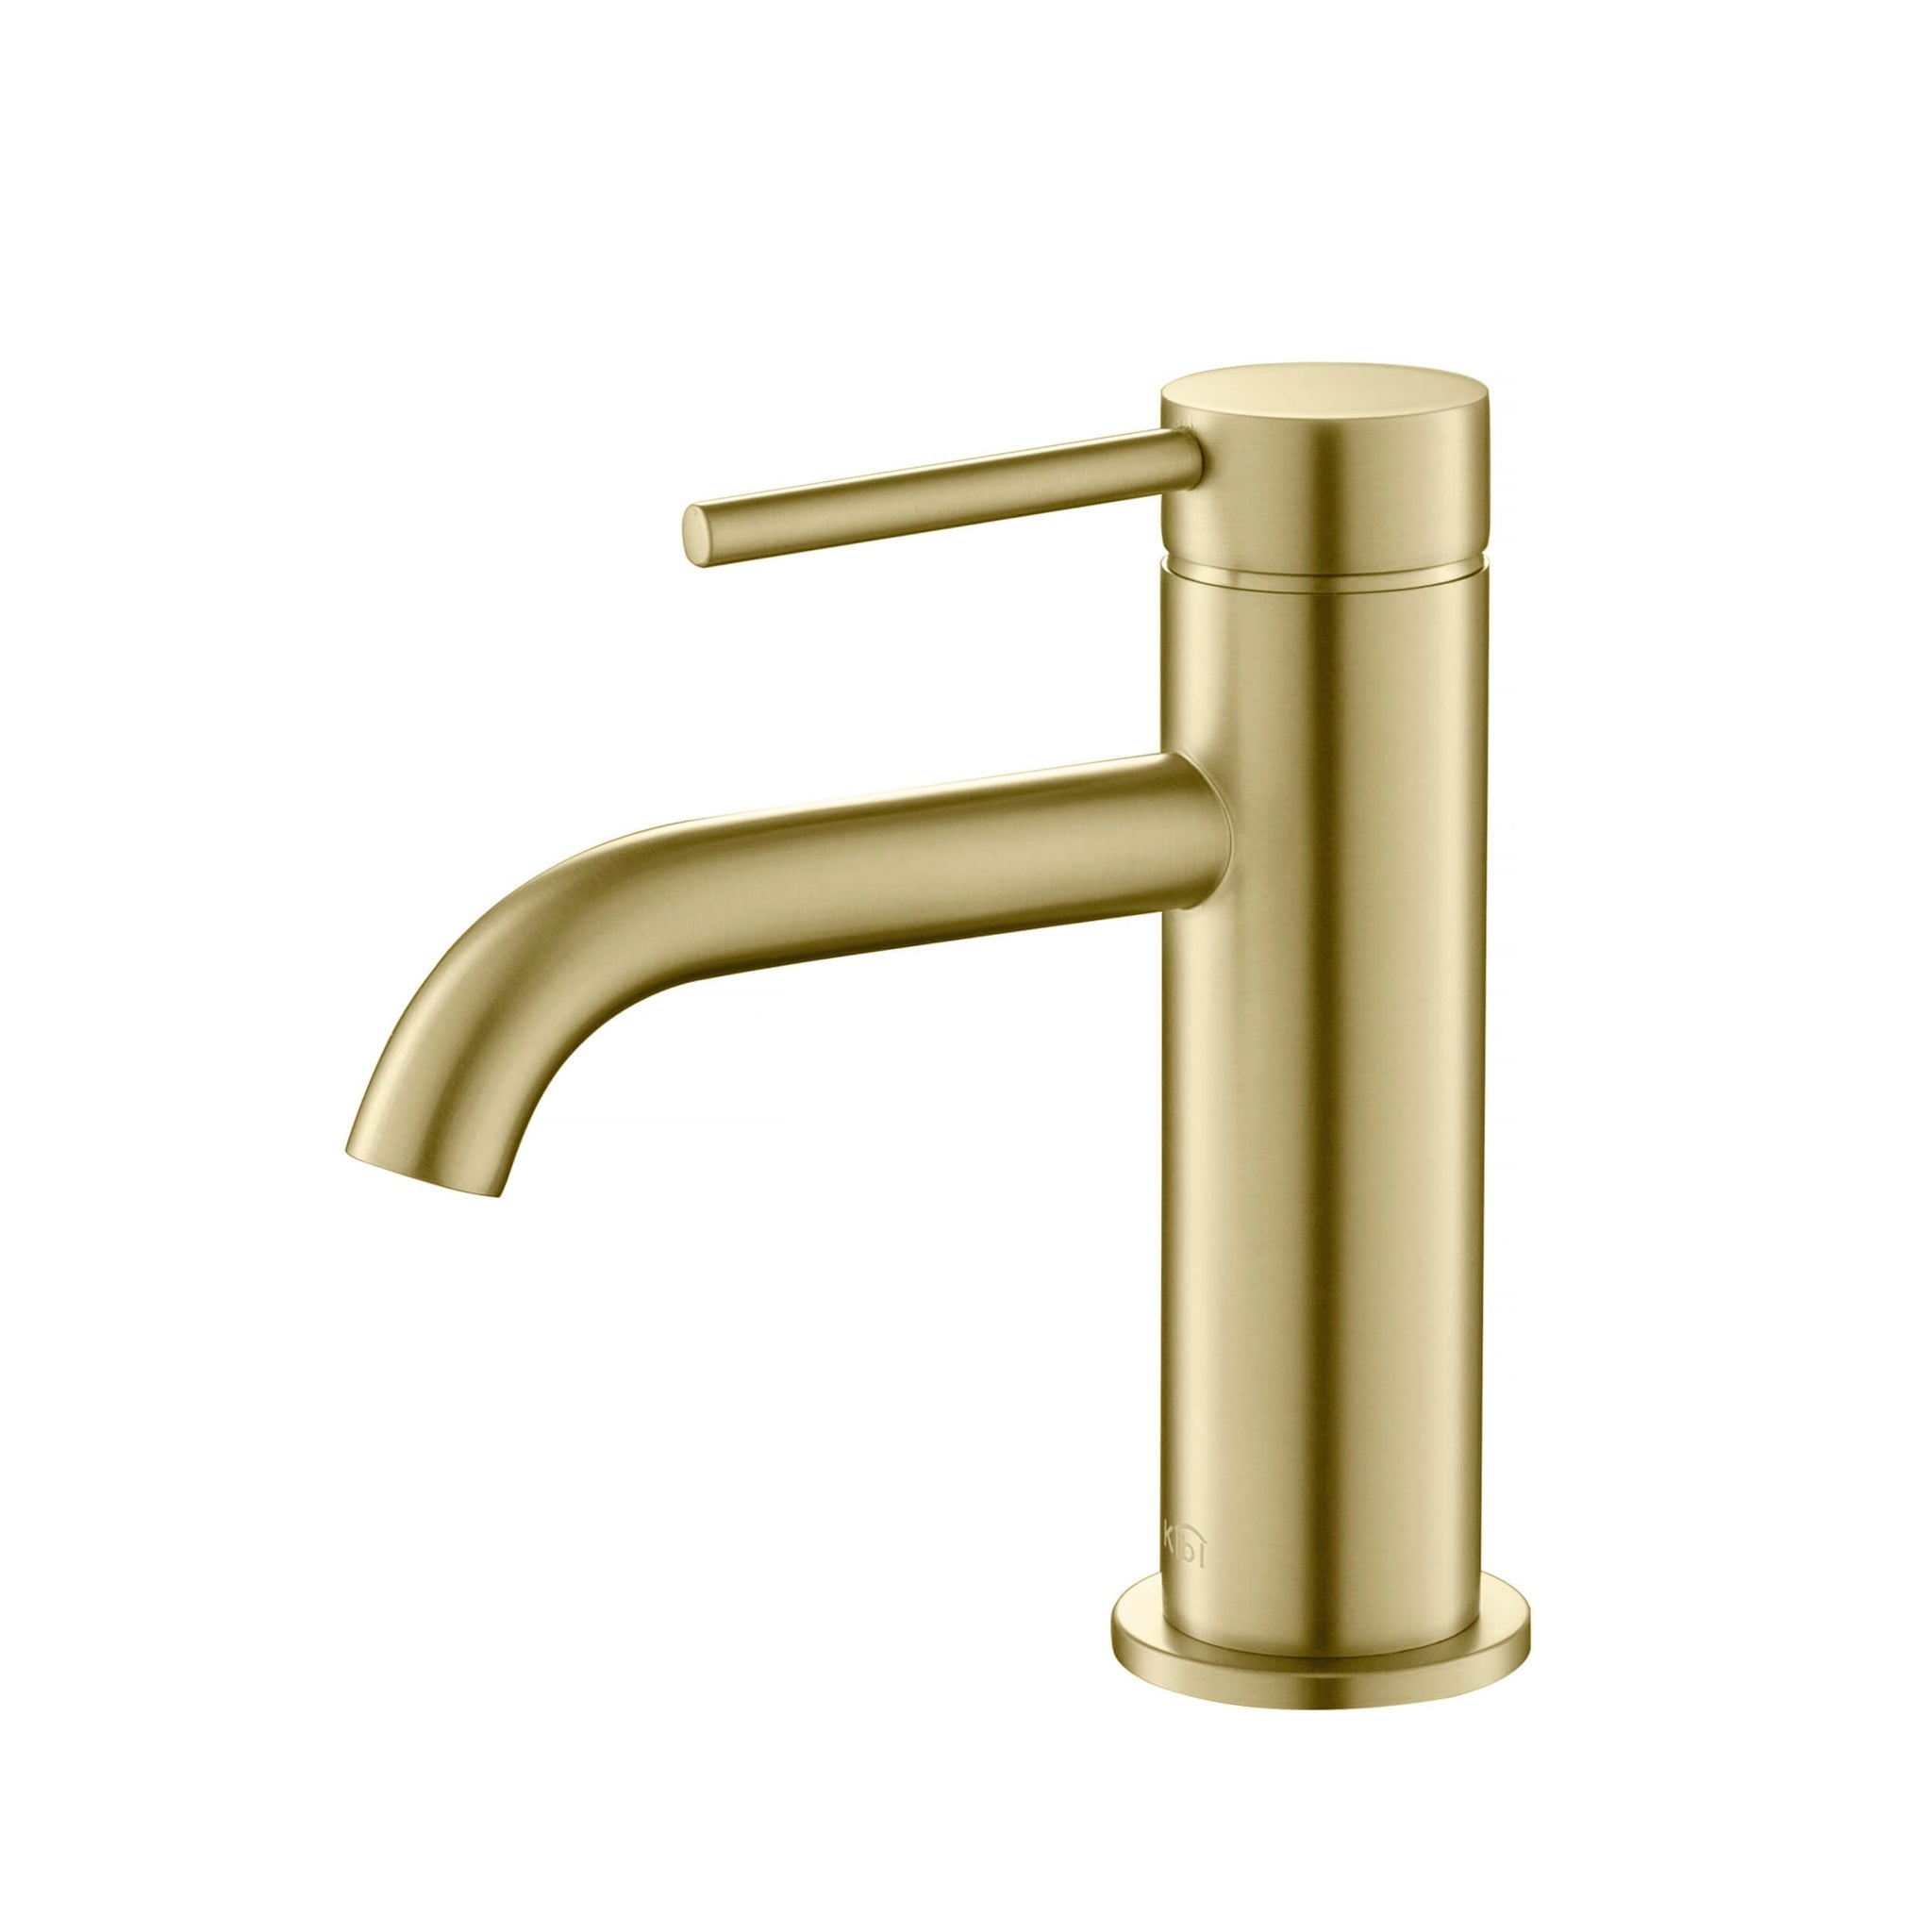 KIBI, KIBI Circular Single Handle Brushed Gold Solid Brass Bathroom Sink Faucet With Pop-Up Drain Stopper Small Cover With Overflow